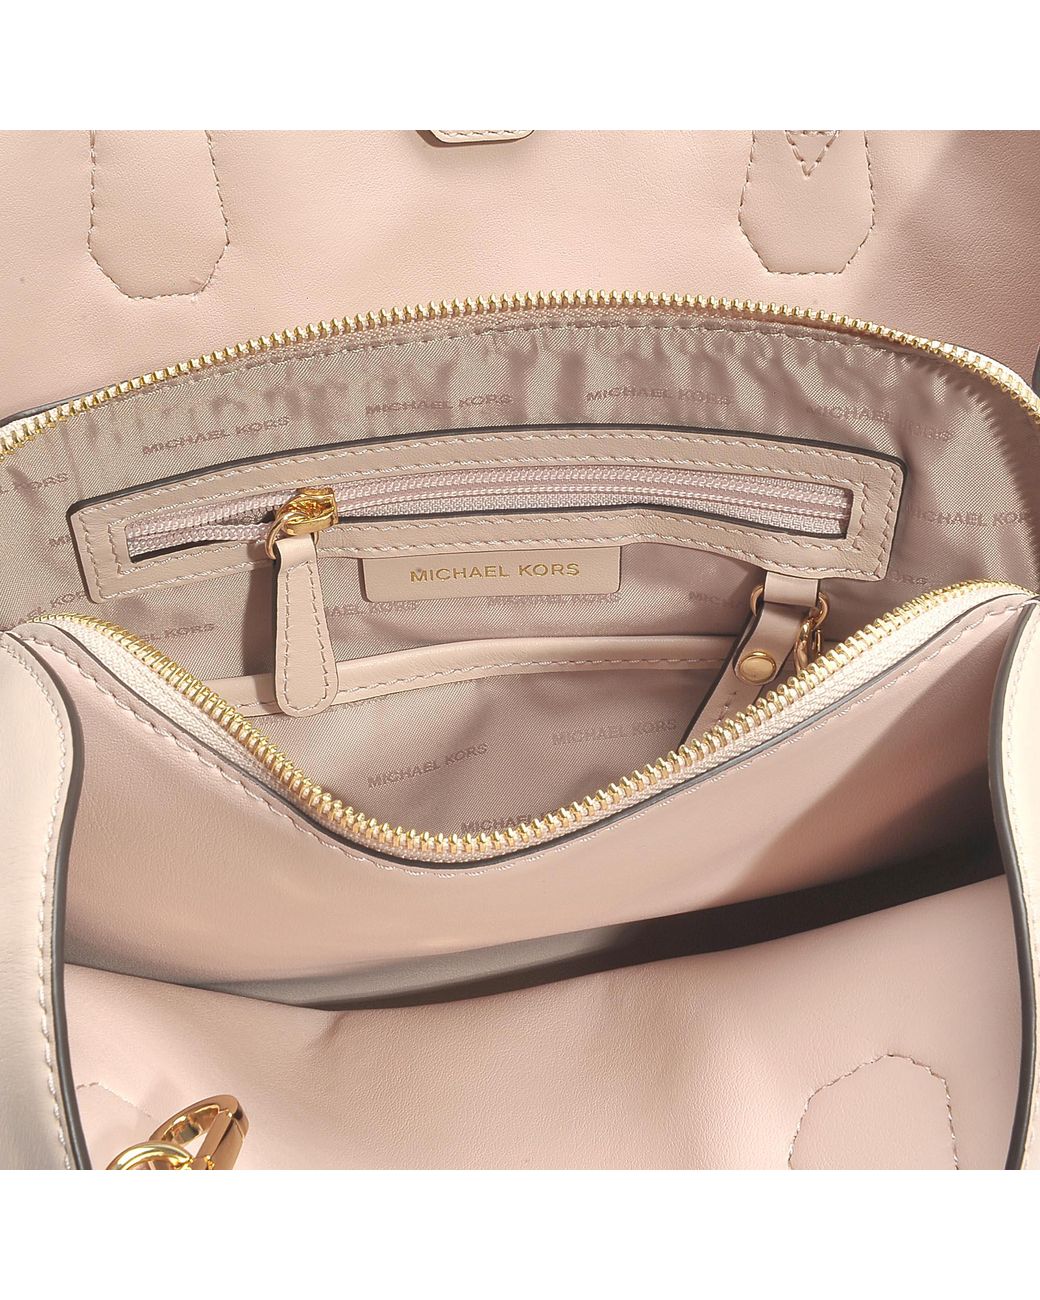 Michael Kors Light Pink Leather Small Mercer Tote